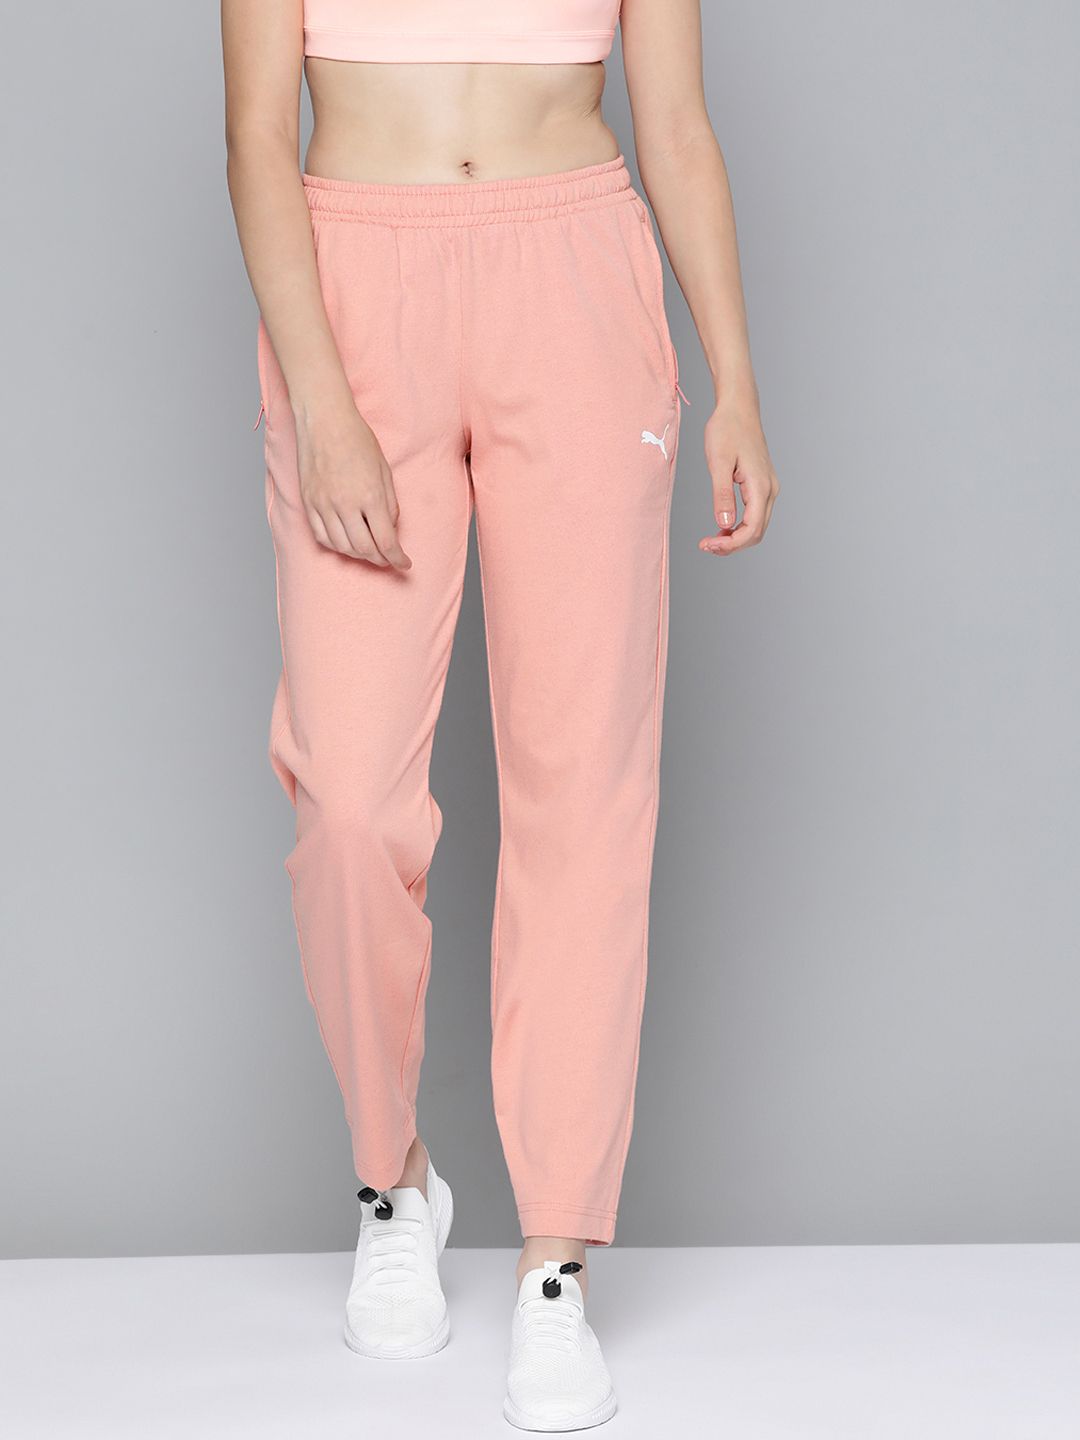 Puma Women Peach-Coloured Regular Fit Zippered Jersey Solid Sweatpants Price in India